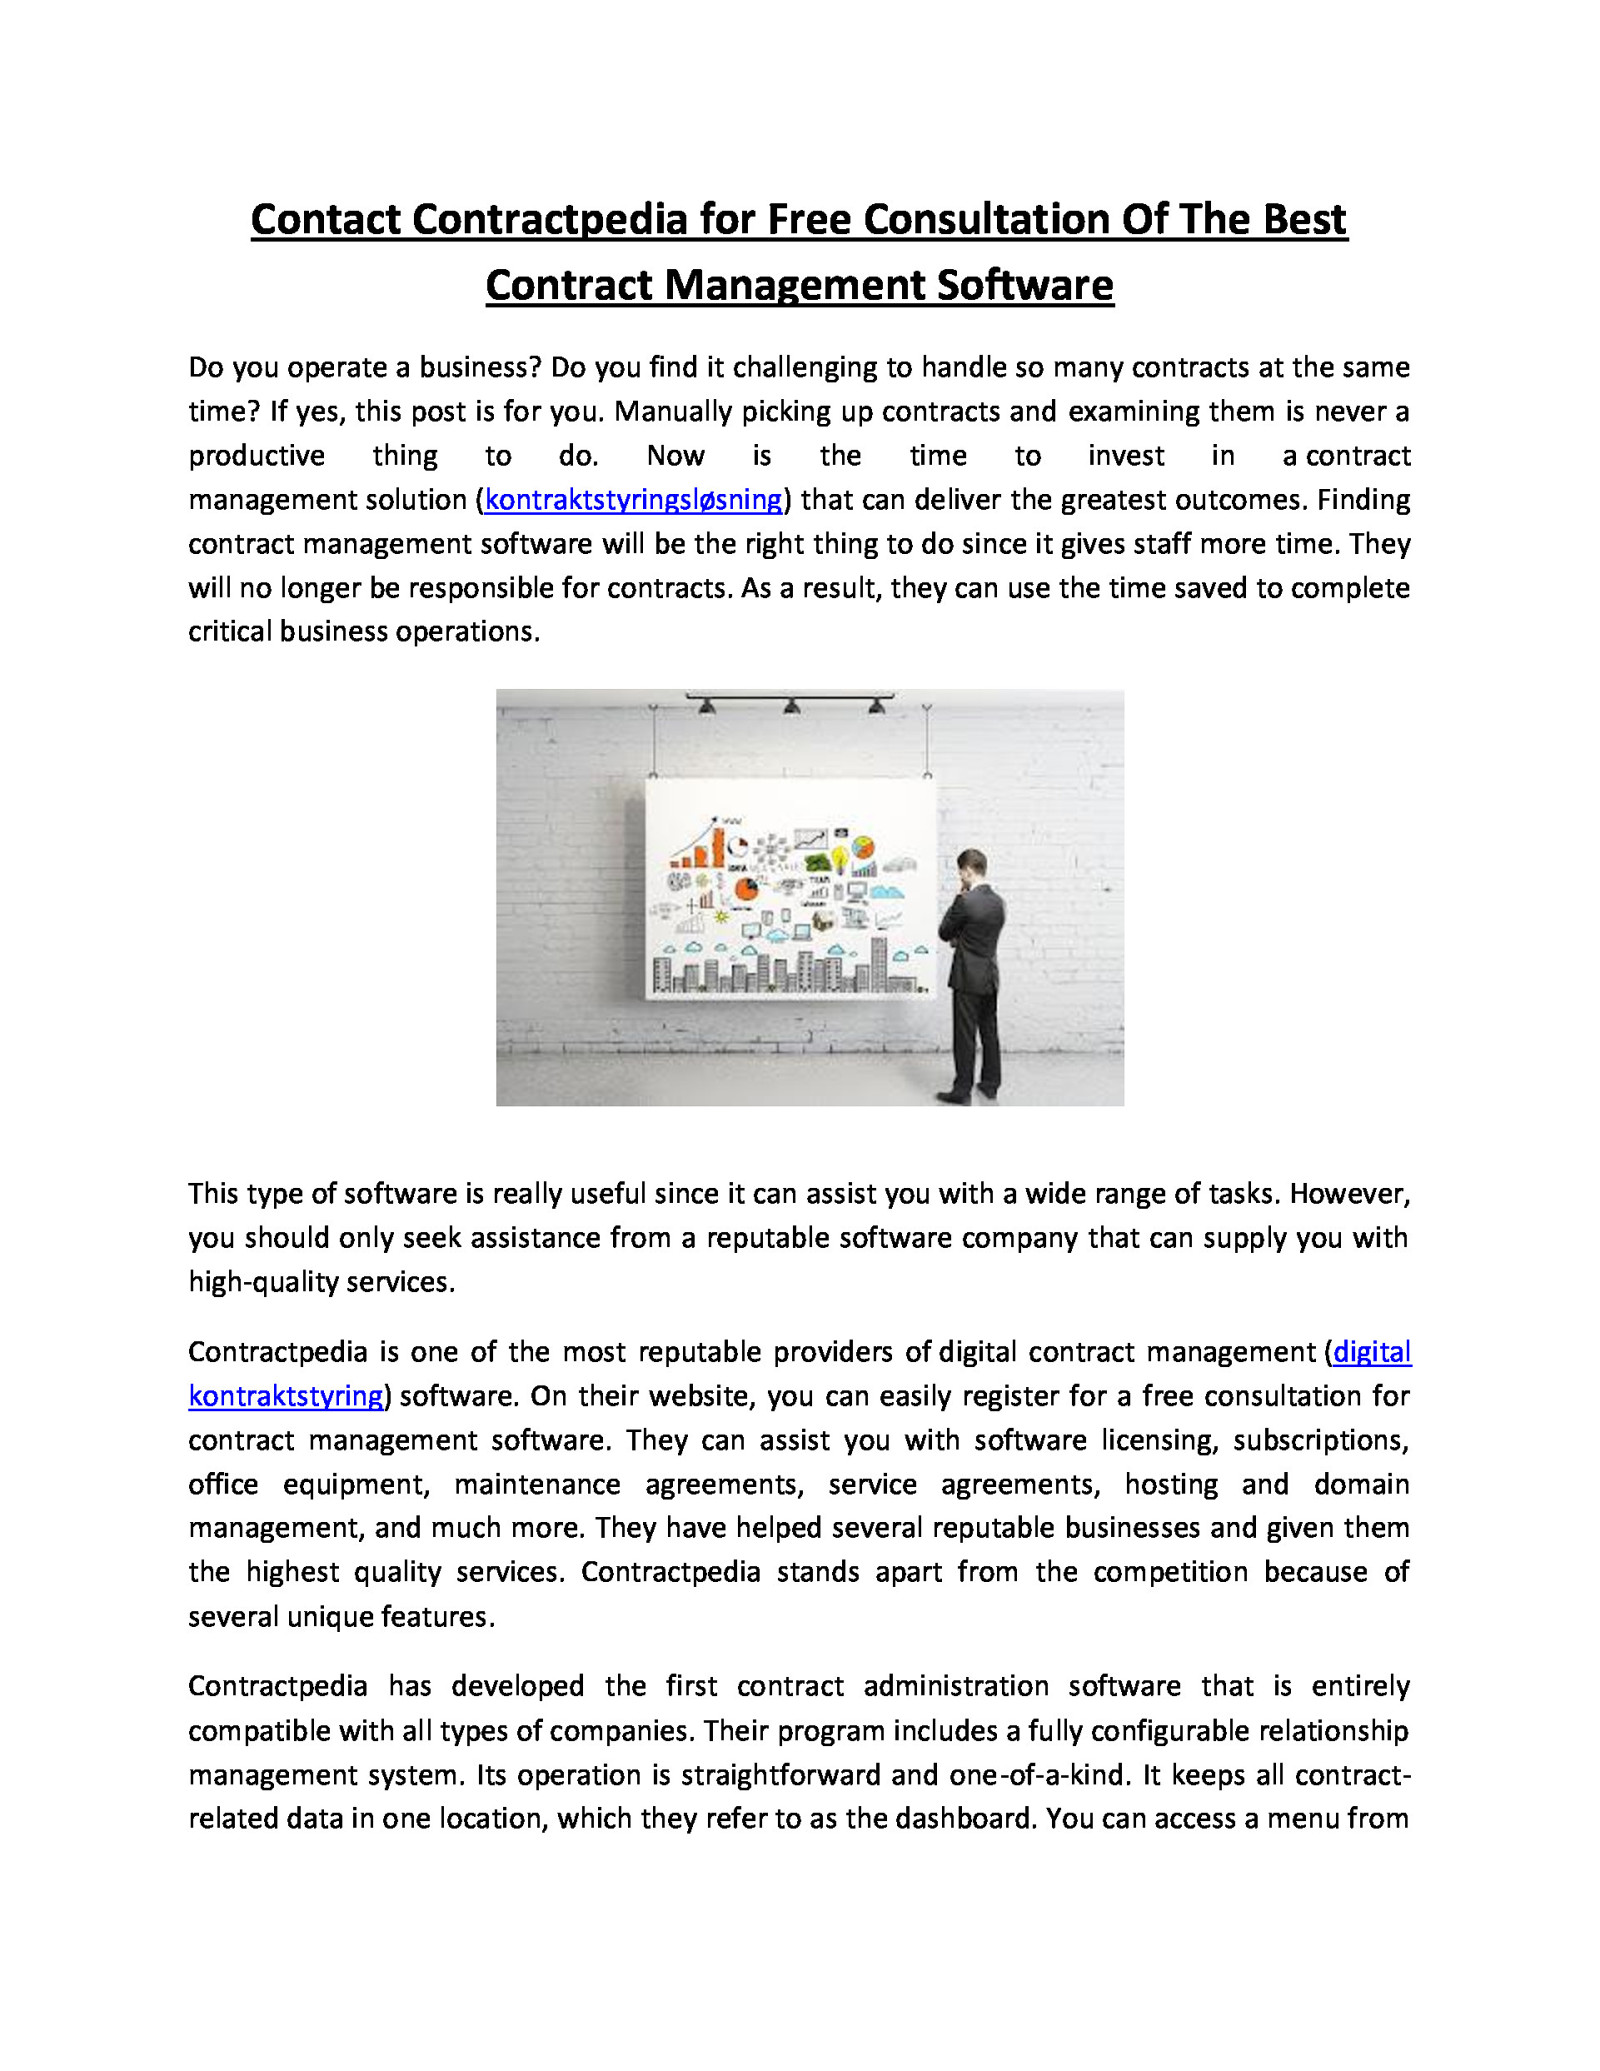 Contact Contractpedia for Free Consultation Of The Best Contract Management Software